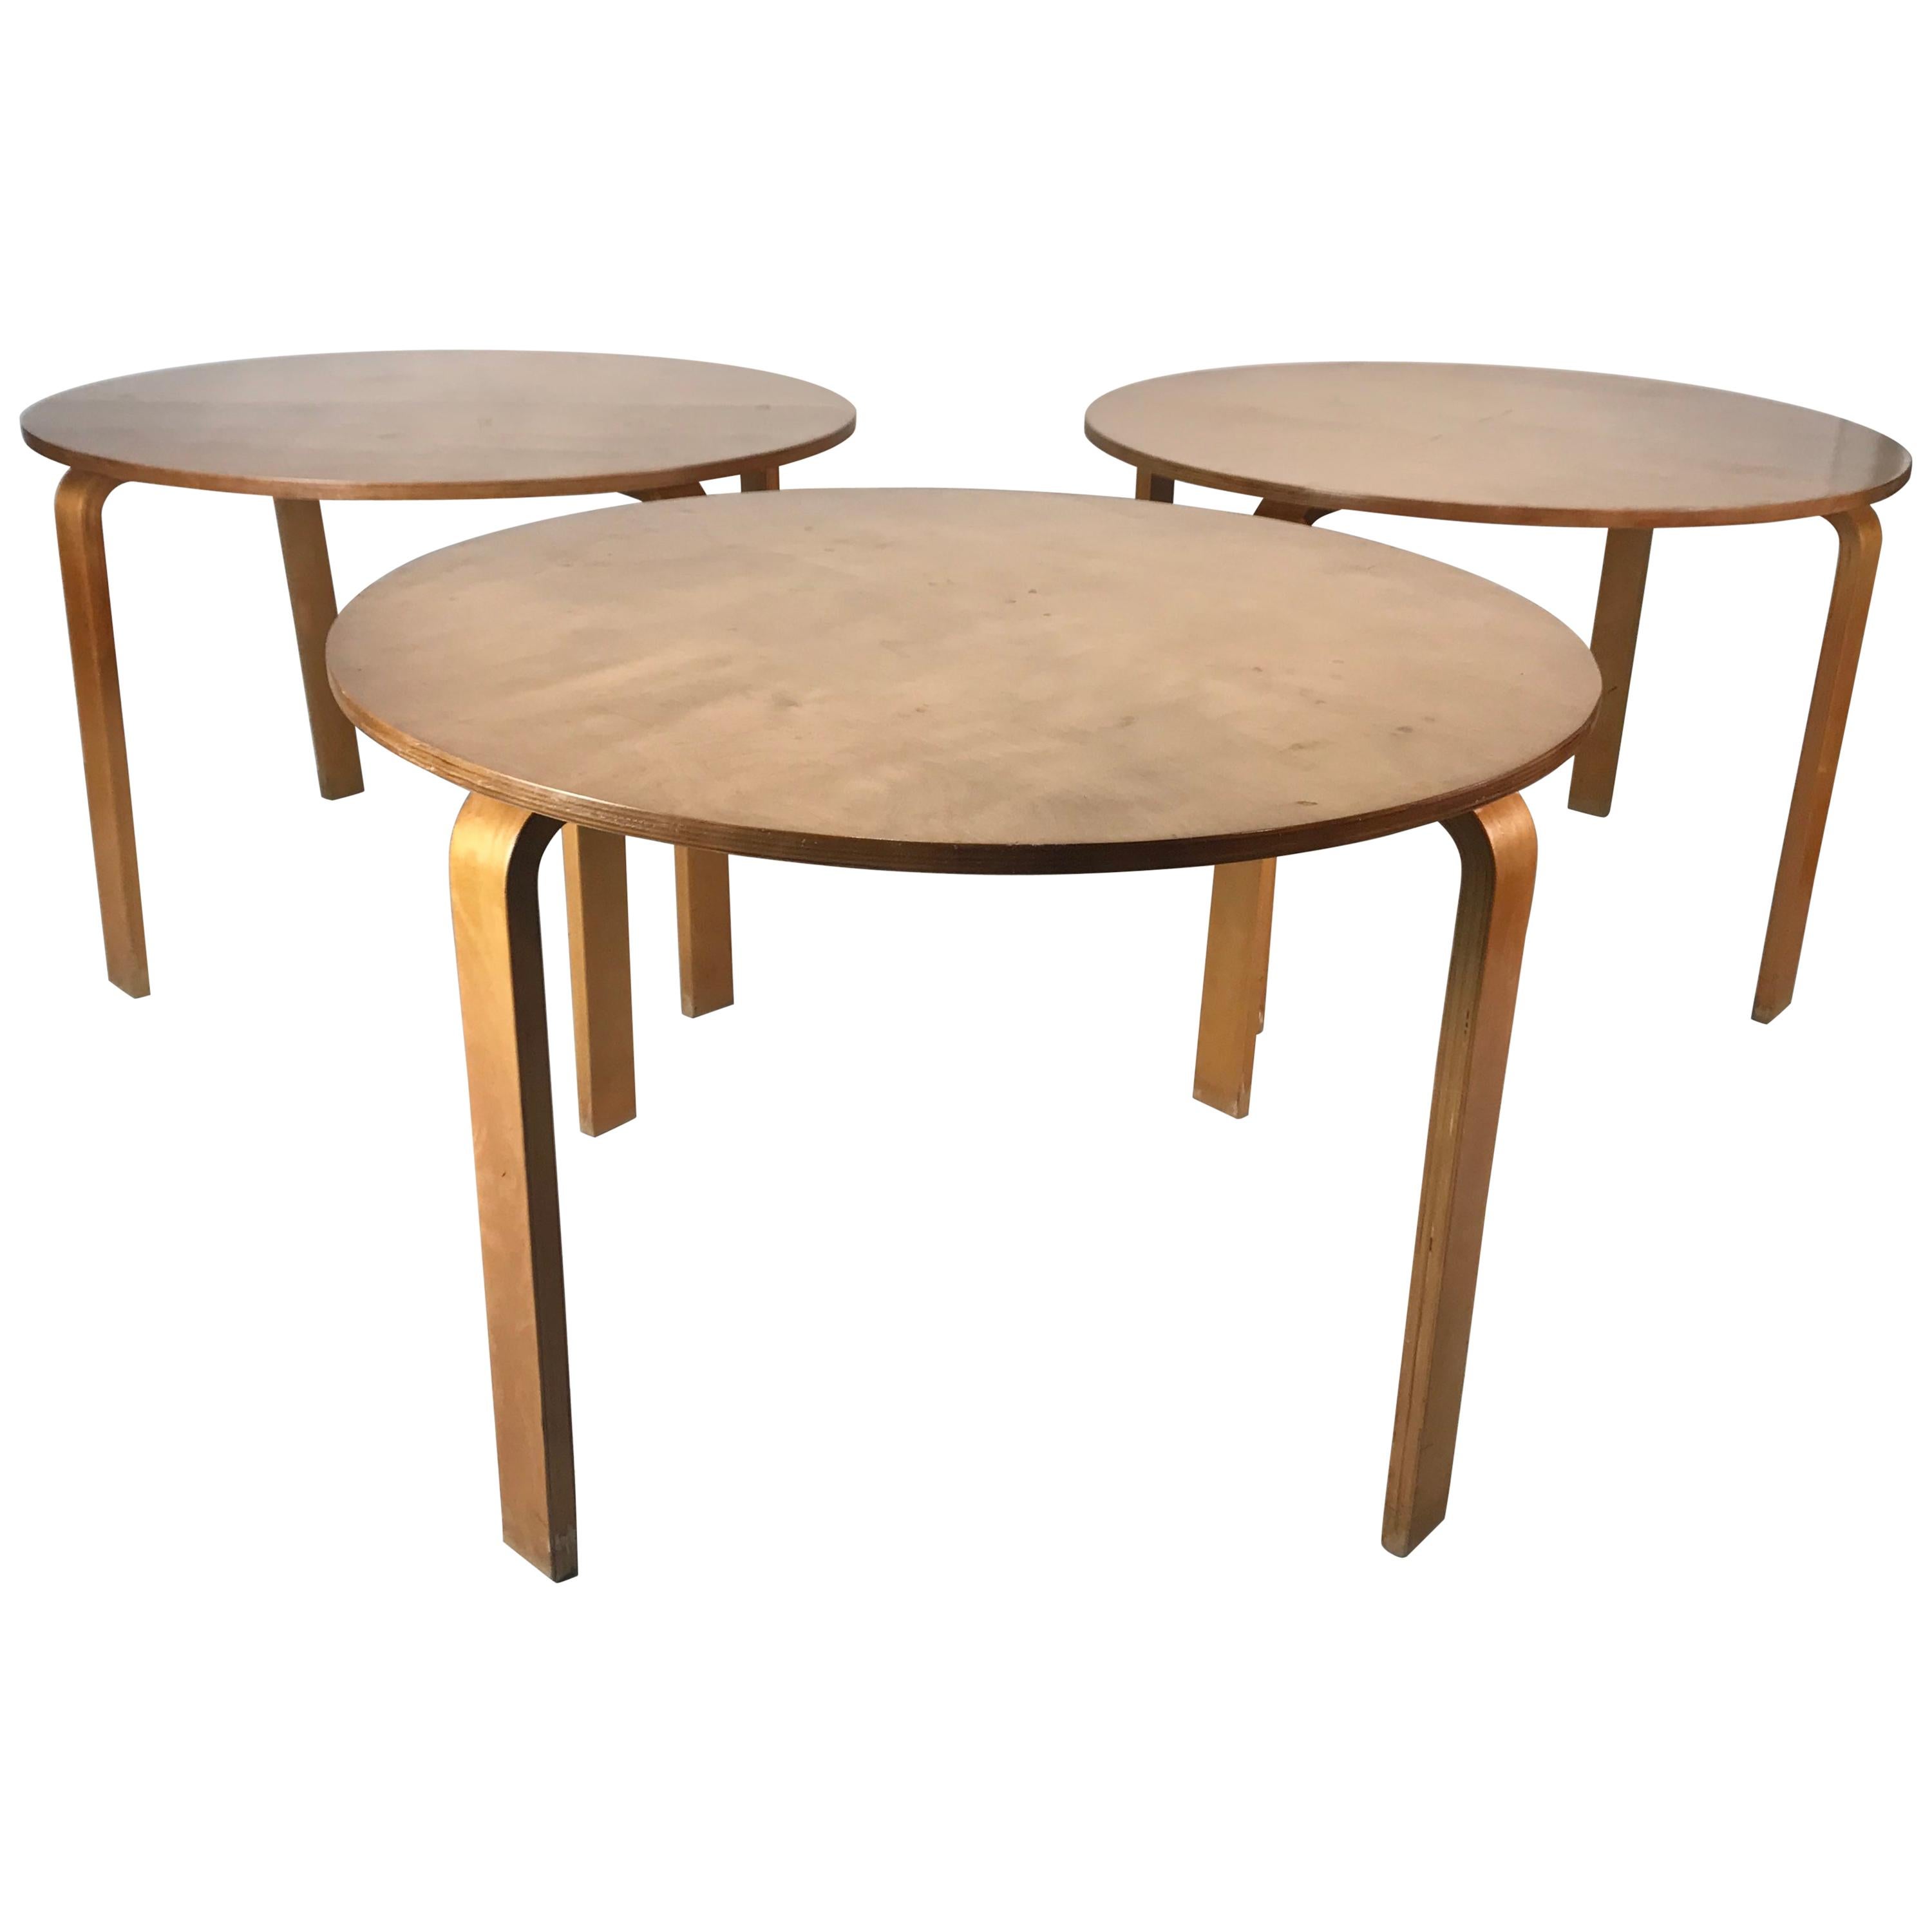 Classic Bent Plywood Bauhaus Style Dining Tables Attributed to Thonet